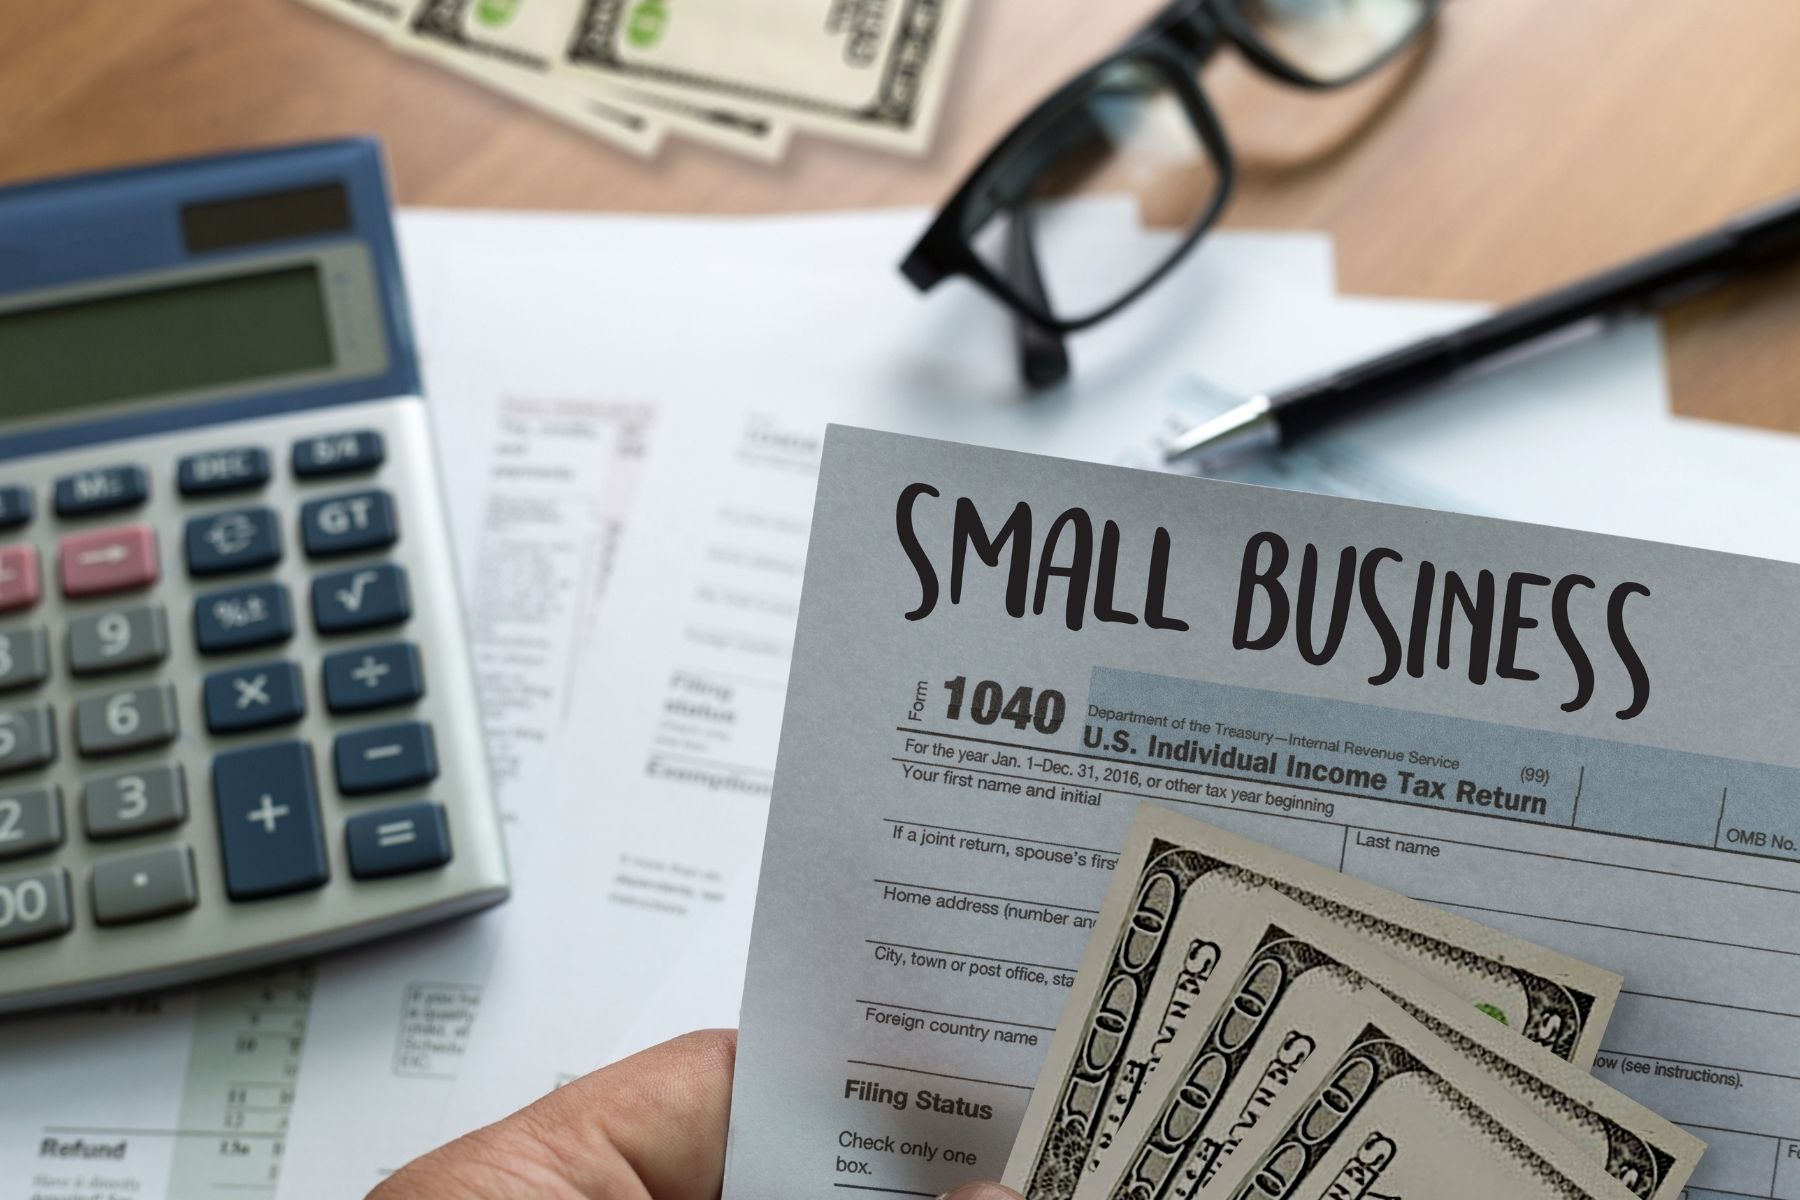 Expert Advice: Cost saving tips for business owners